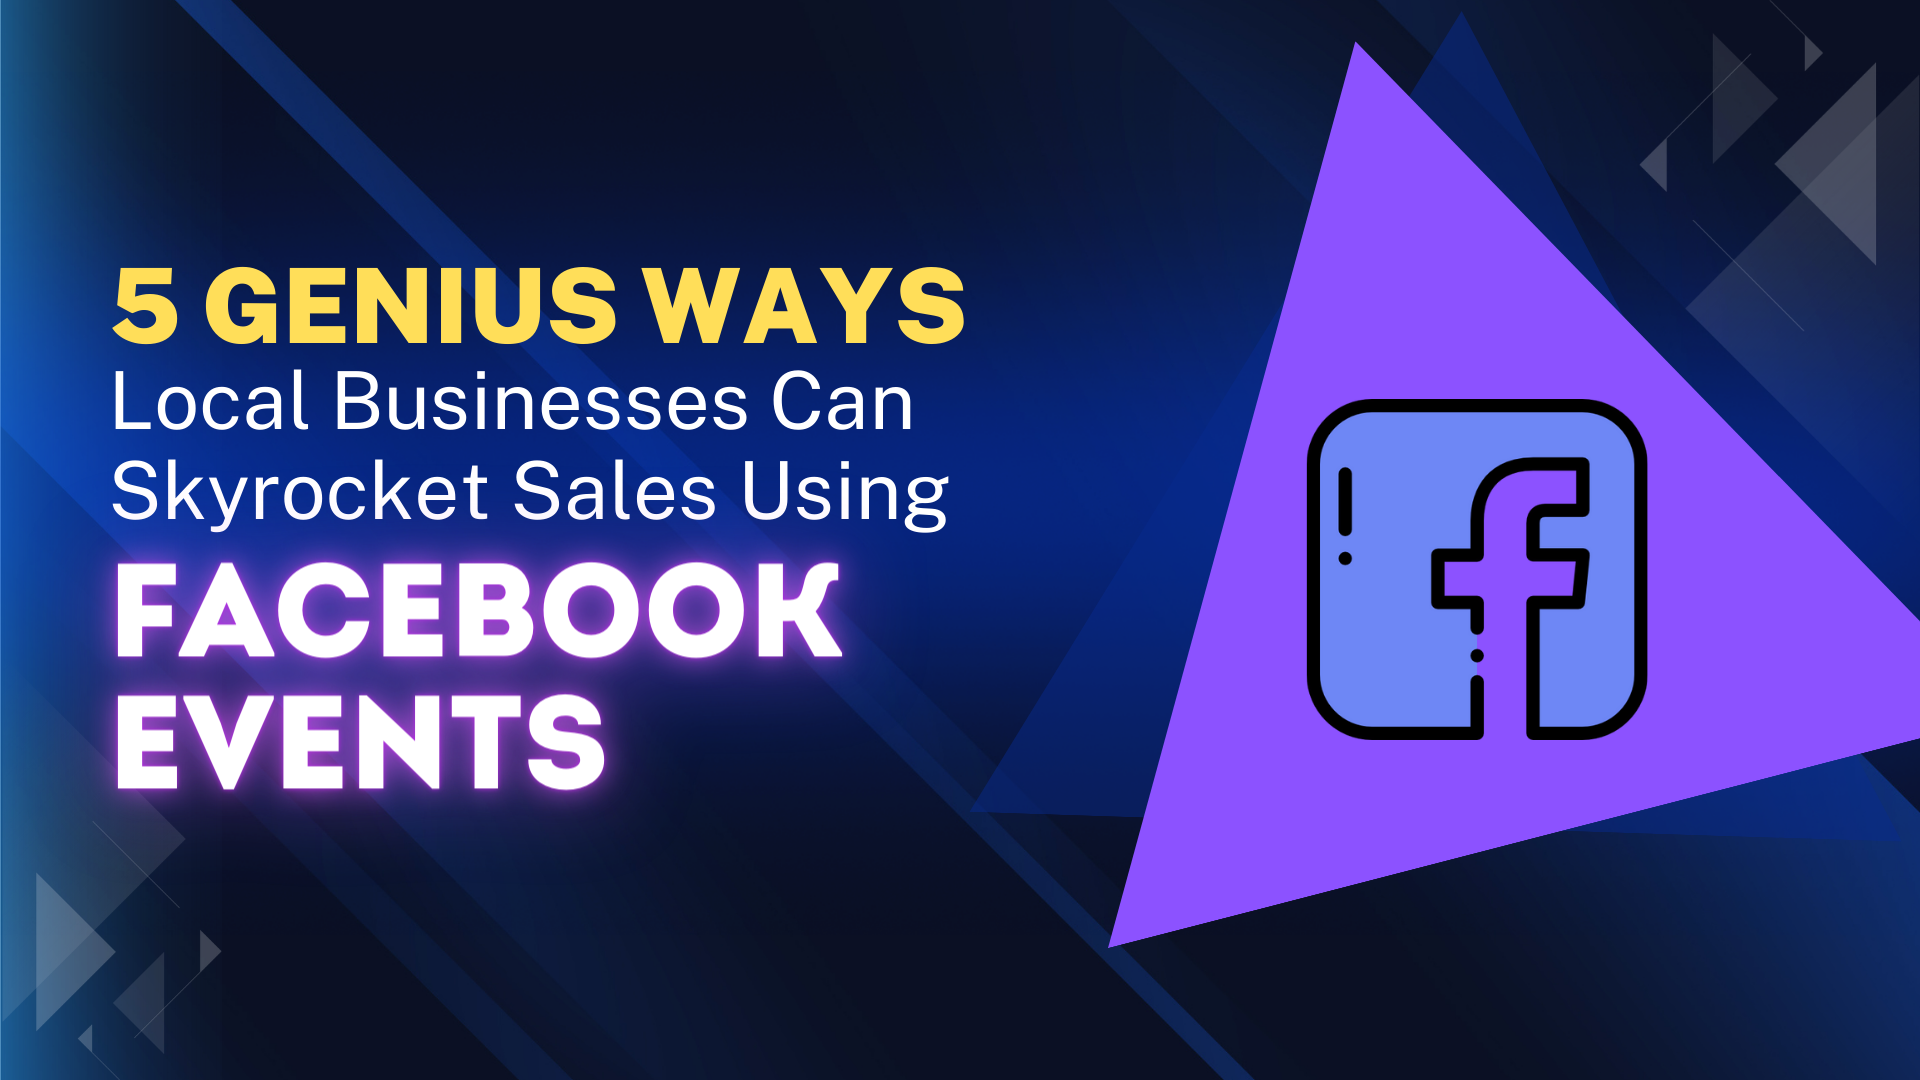 Facebook events to promote local business